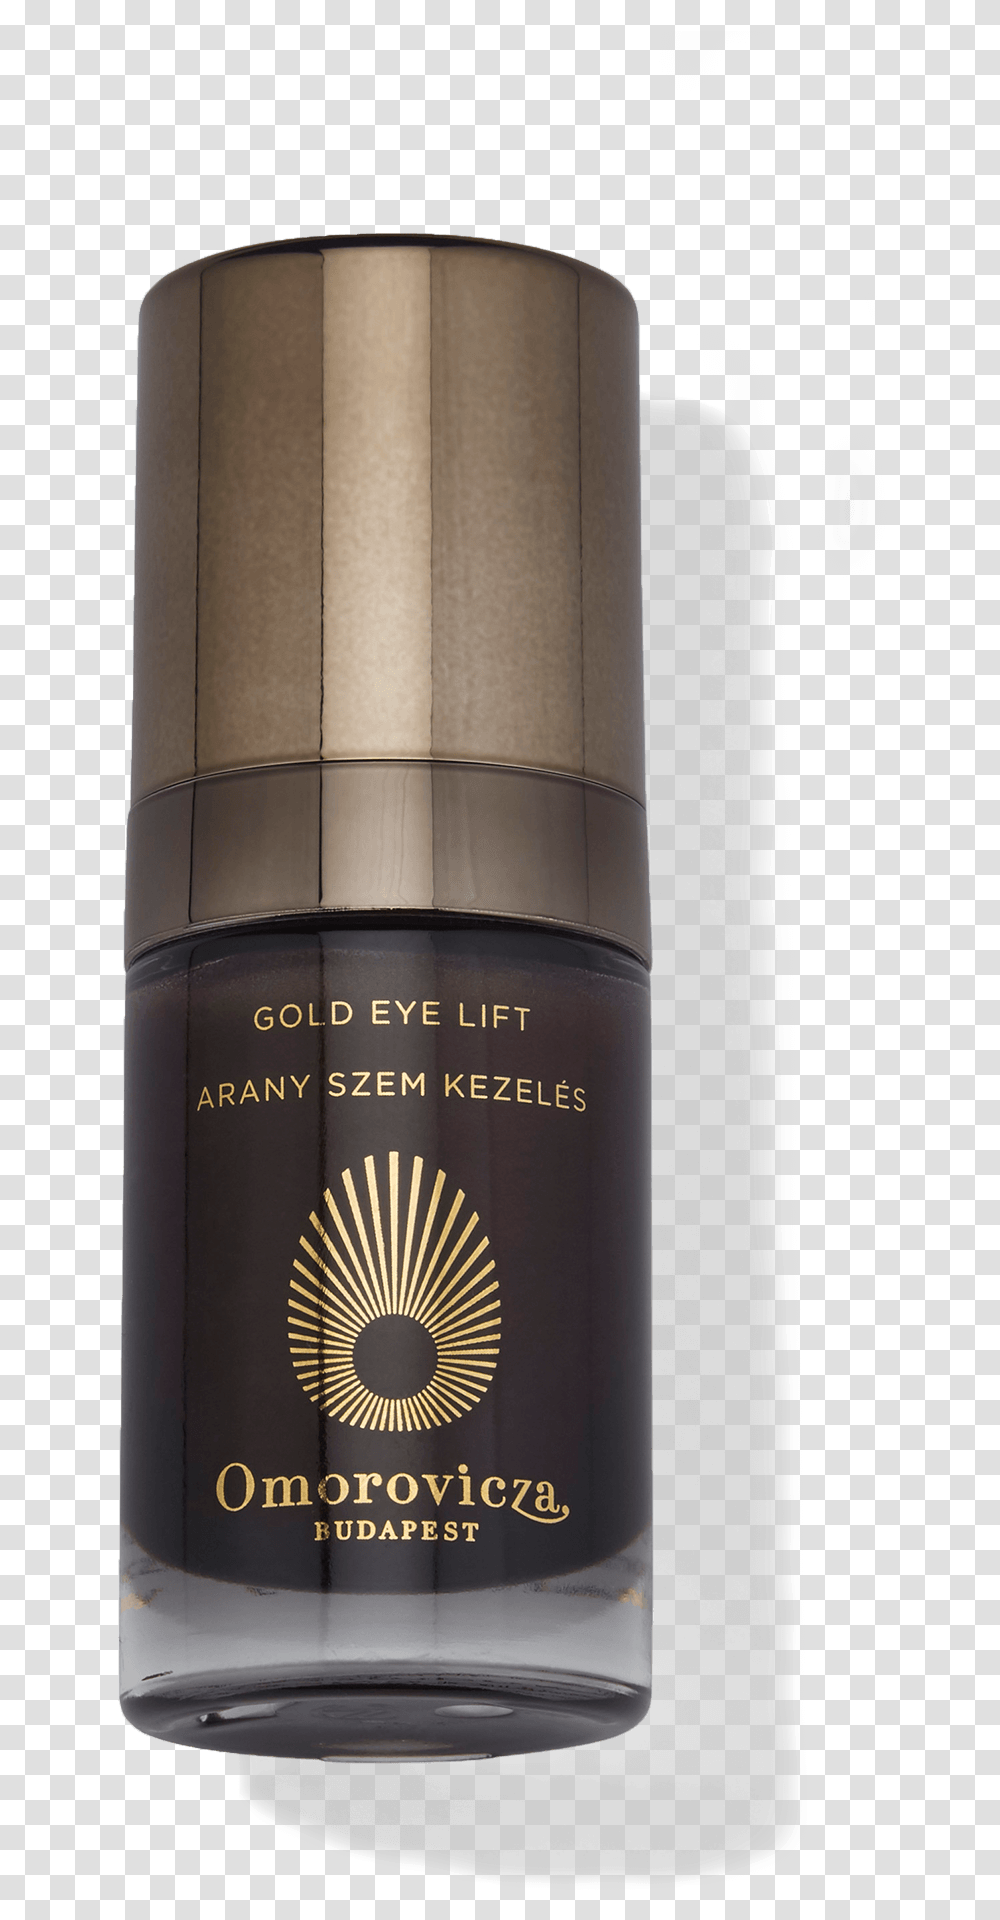 Gold Eye Lift Perfume, Bottle, Cosmetics, Beer, Alcohol Transparent Png